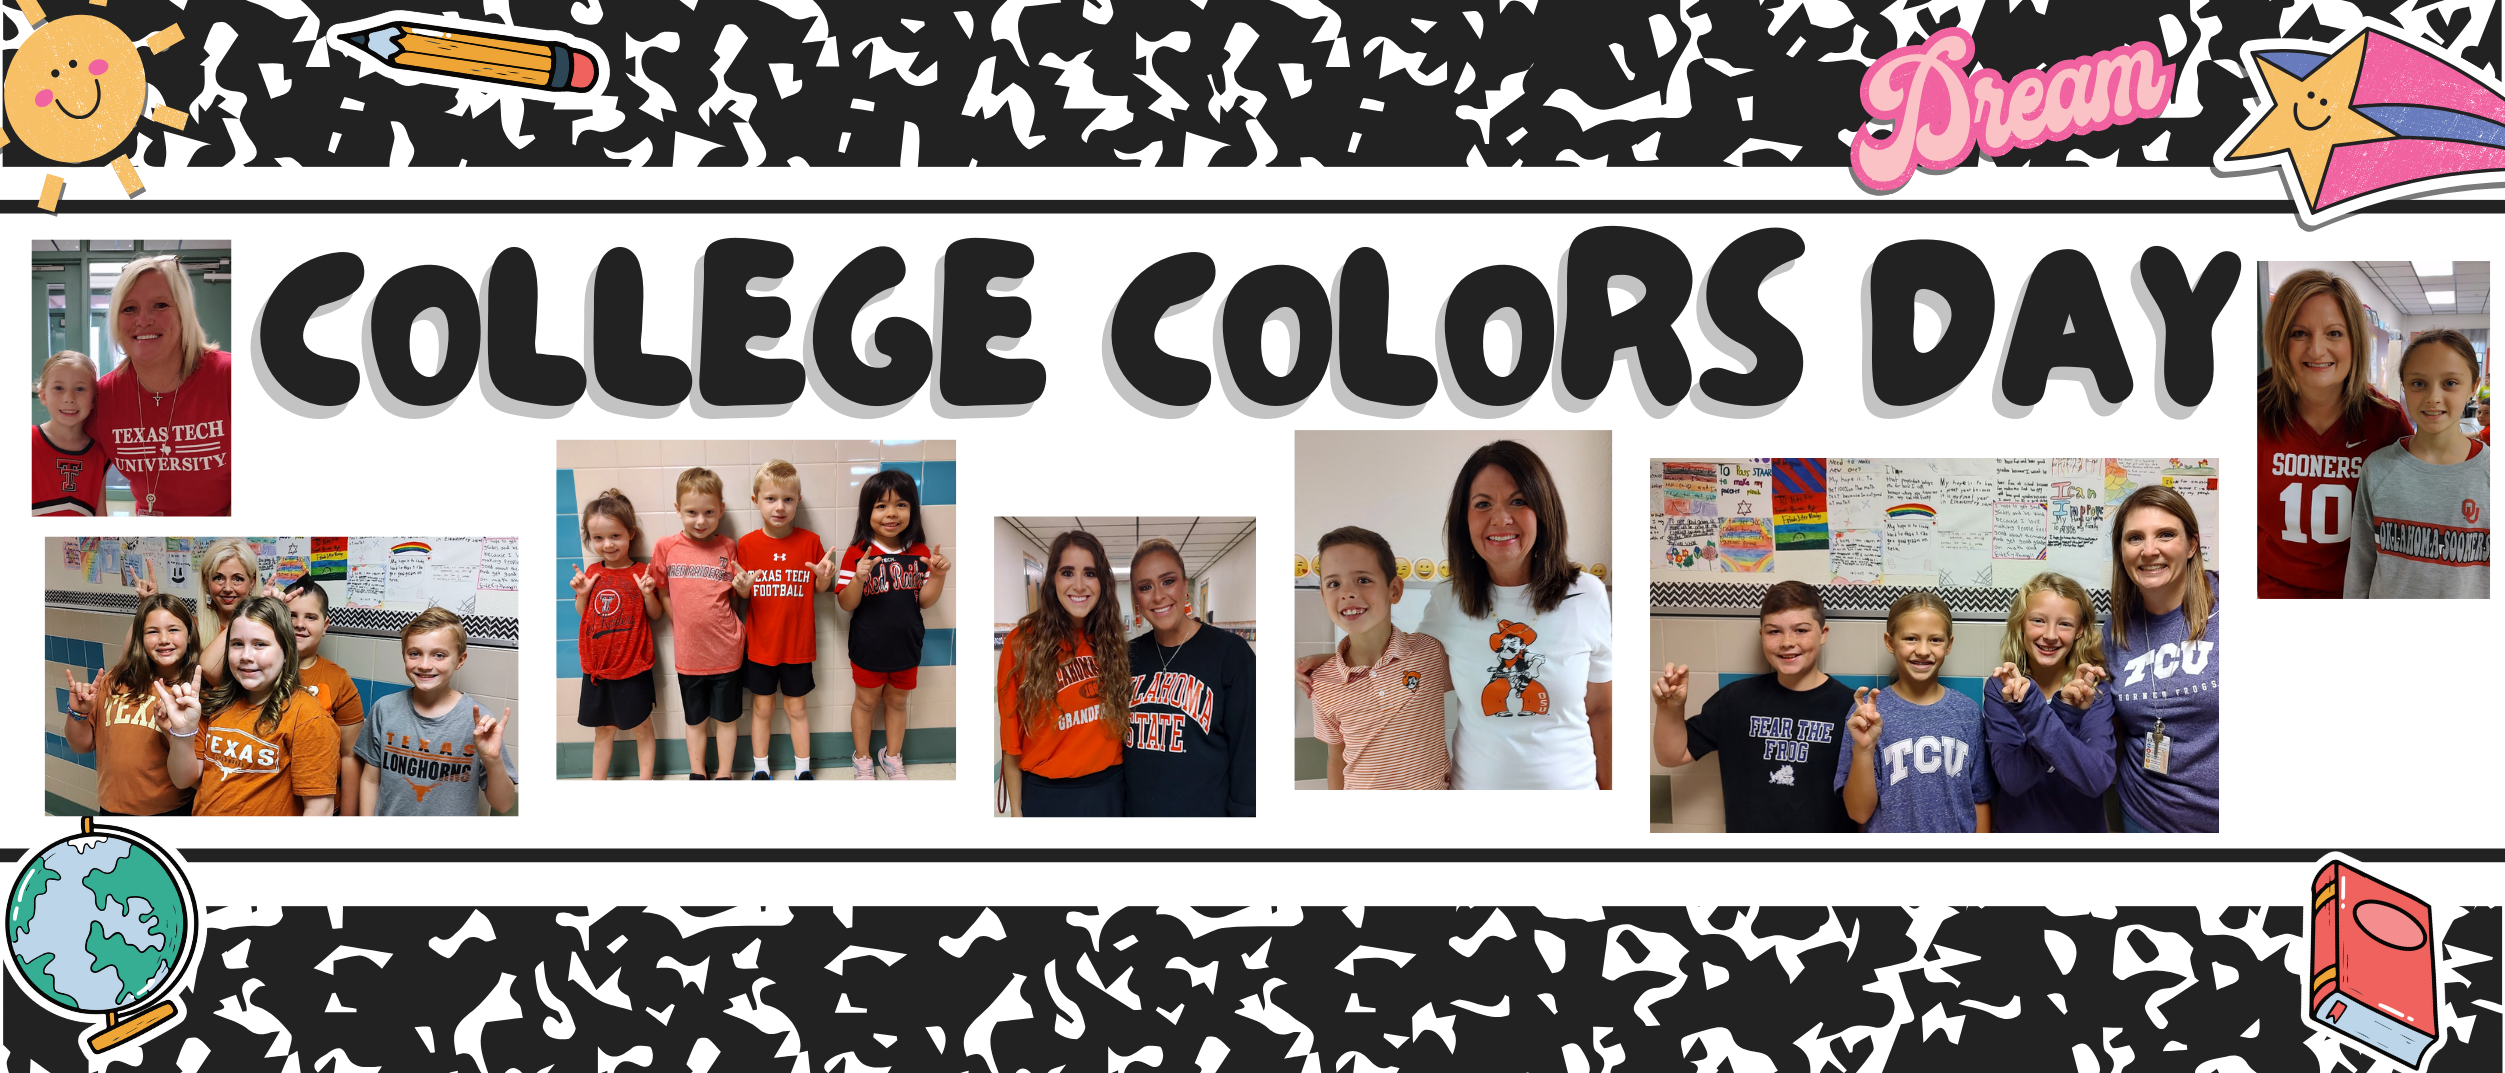 College Colors Day - students and teachers wearing their favorite college shirts